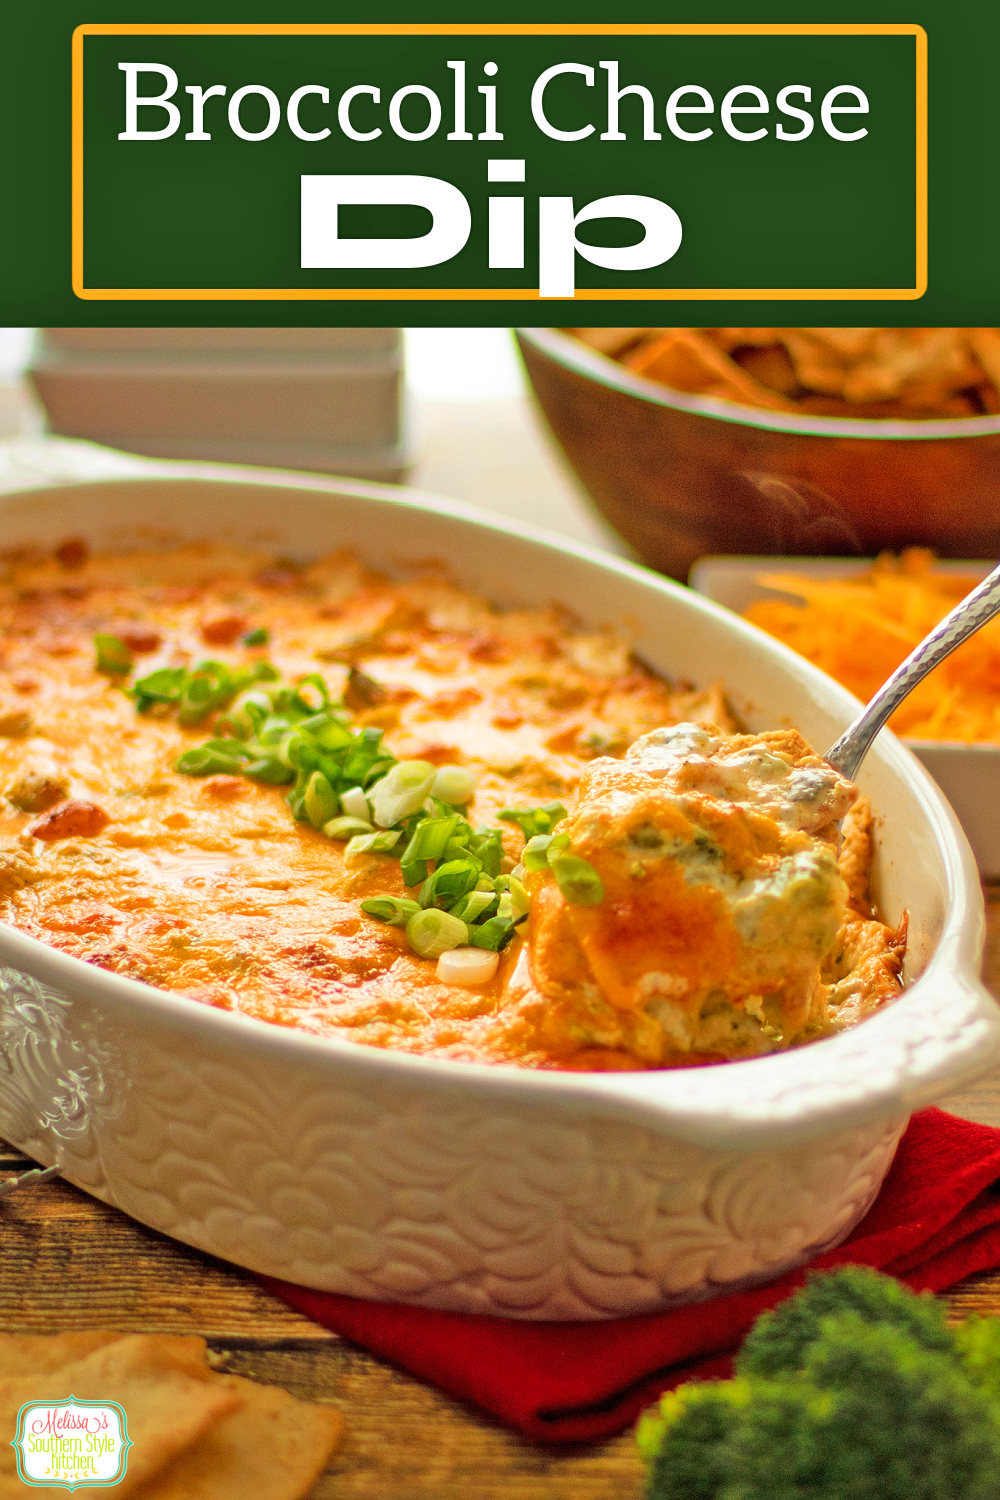 Serve this simple Broccoli Cheese Dip with pita chips, crostini or crackers for dipping. #broccolicheese #broccolicheesedip #diprecipes #appetizers #easydiprecipe #gamedayrecipes #holidaystarters via @melissasssk